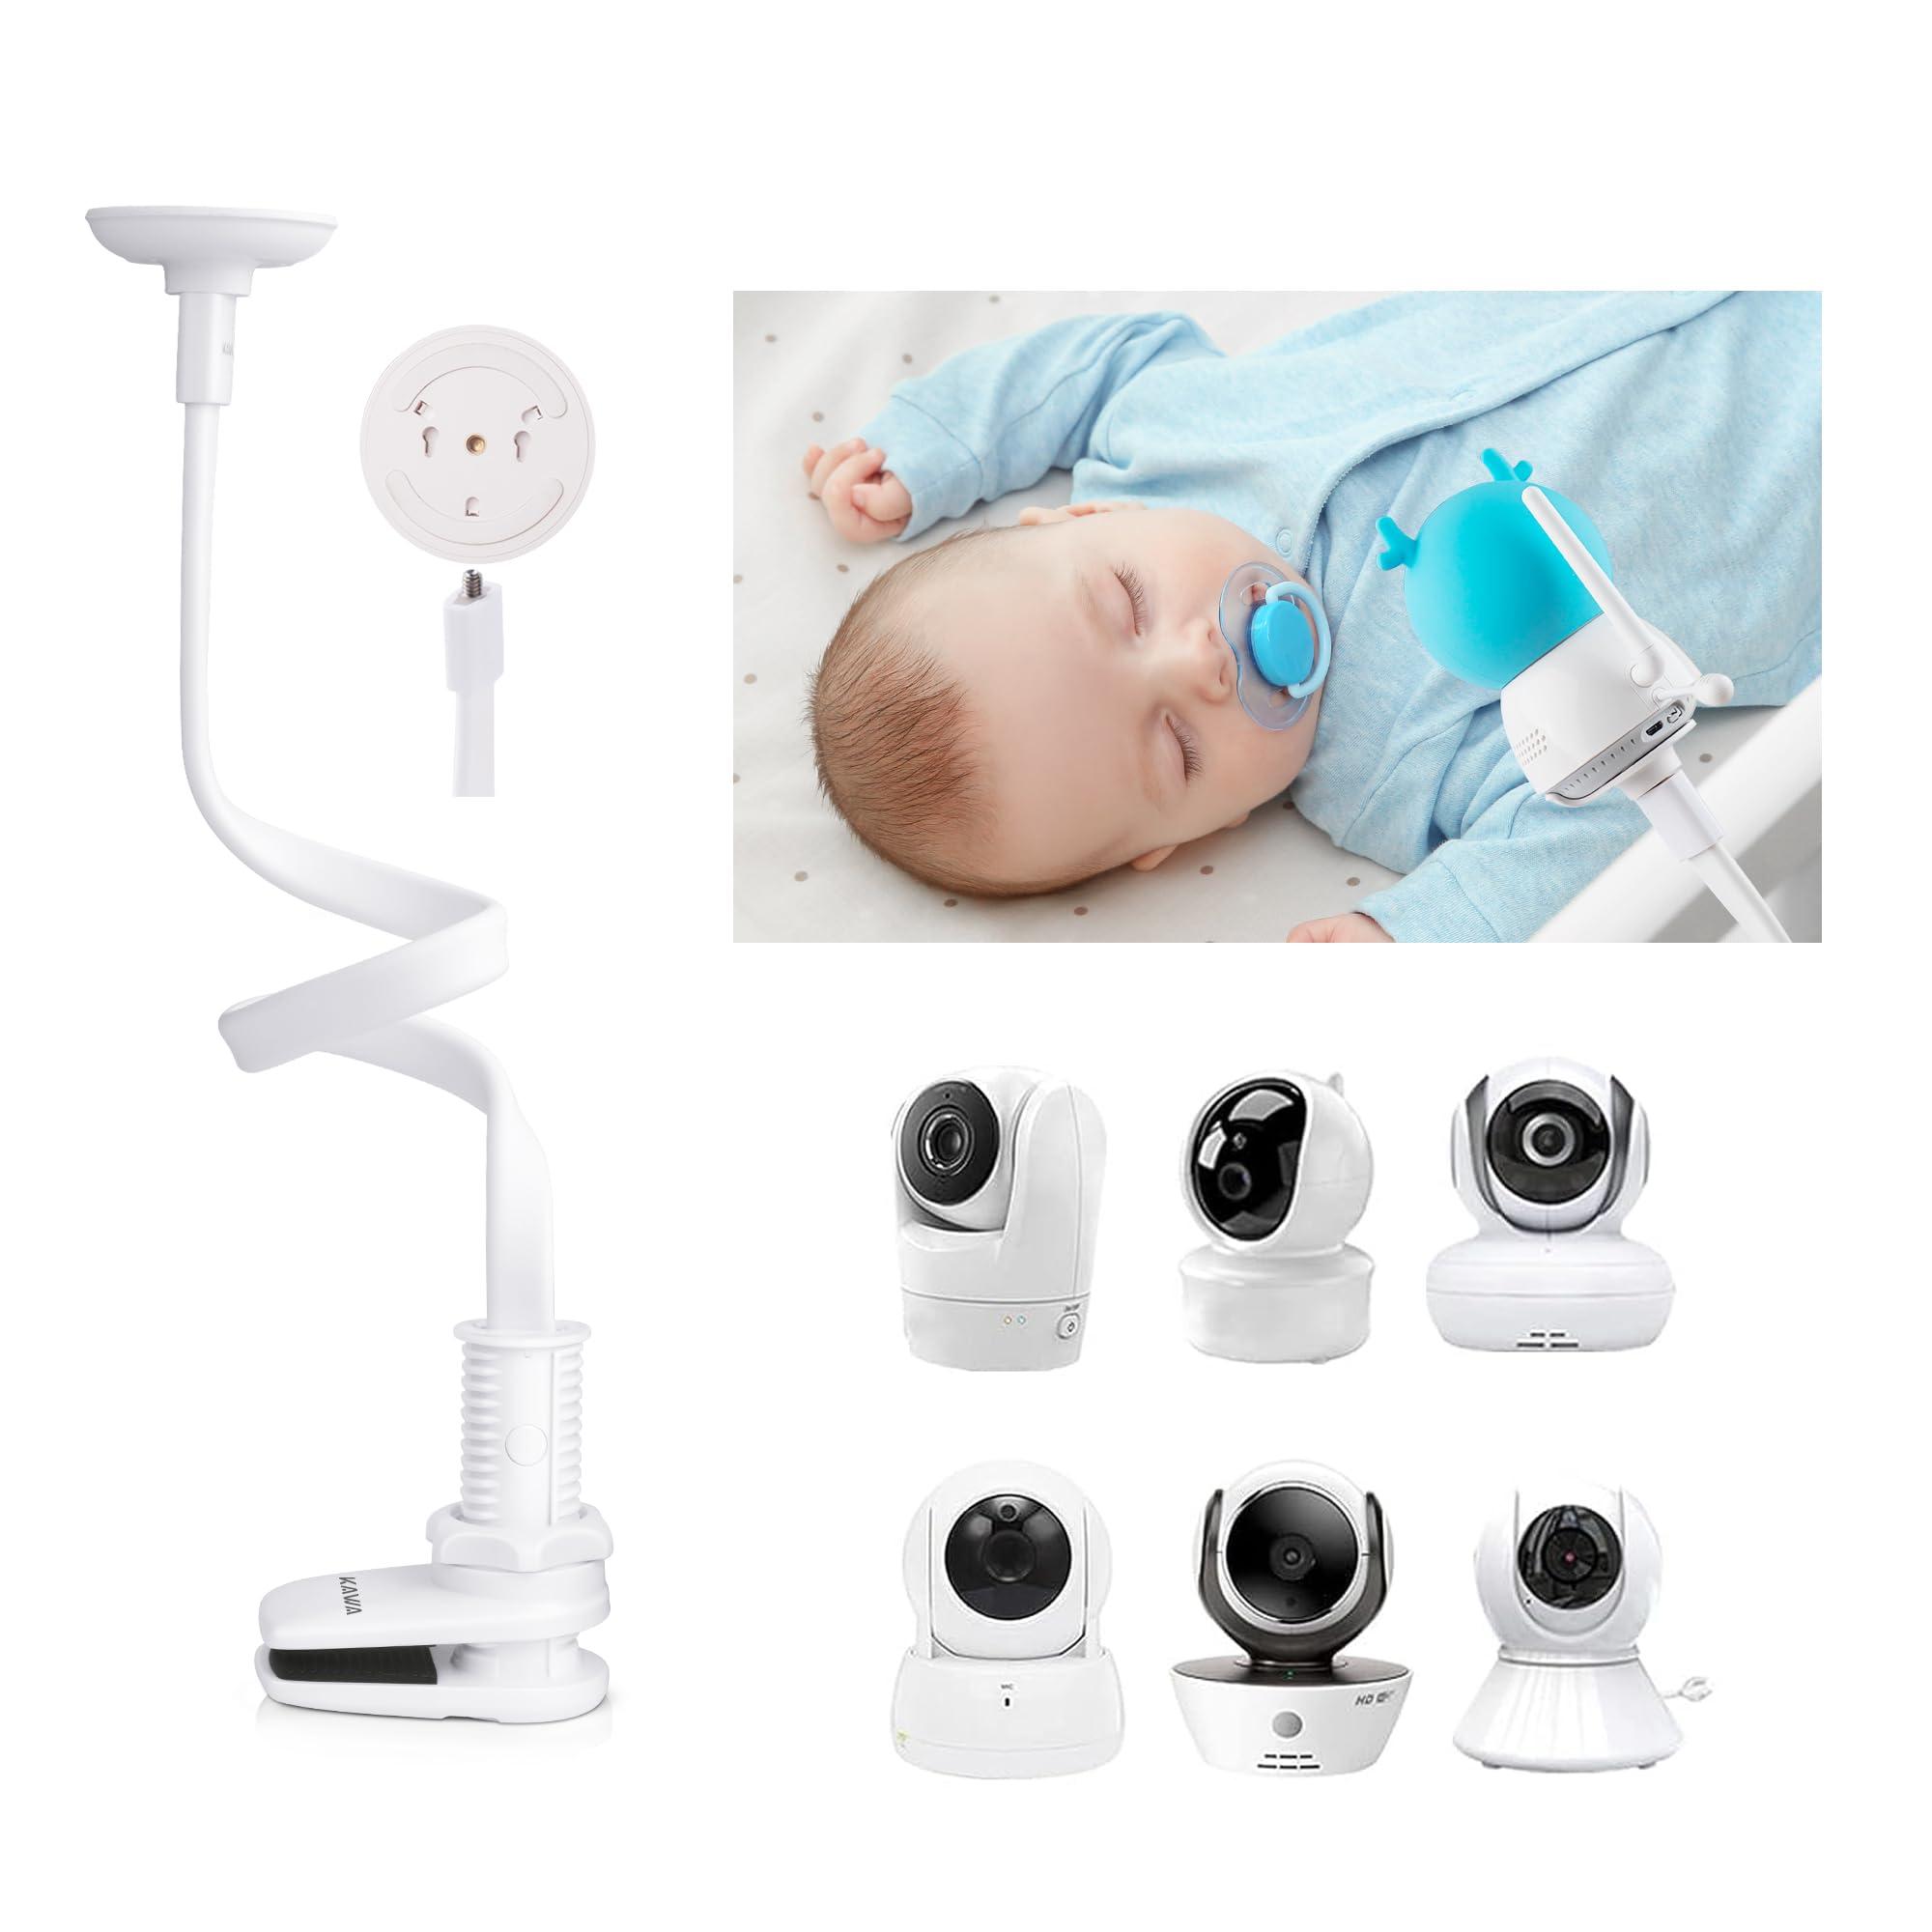 KAWA Baby Monitor Holder, Universal Baby Monitor Mount for Crib, Flexible Baby Monitor Holder, Compatible for All 1/4 Triple Hole Baby Monitor Camera, Without Tools or Wall Damage 0